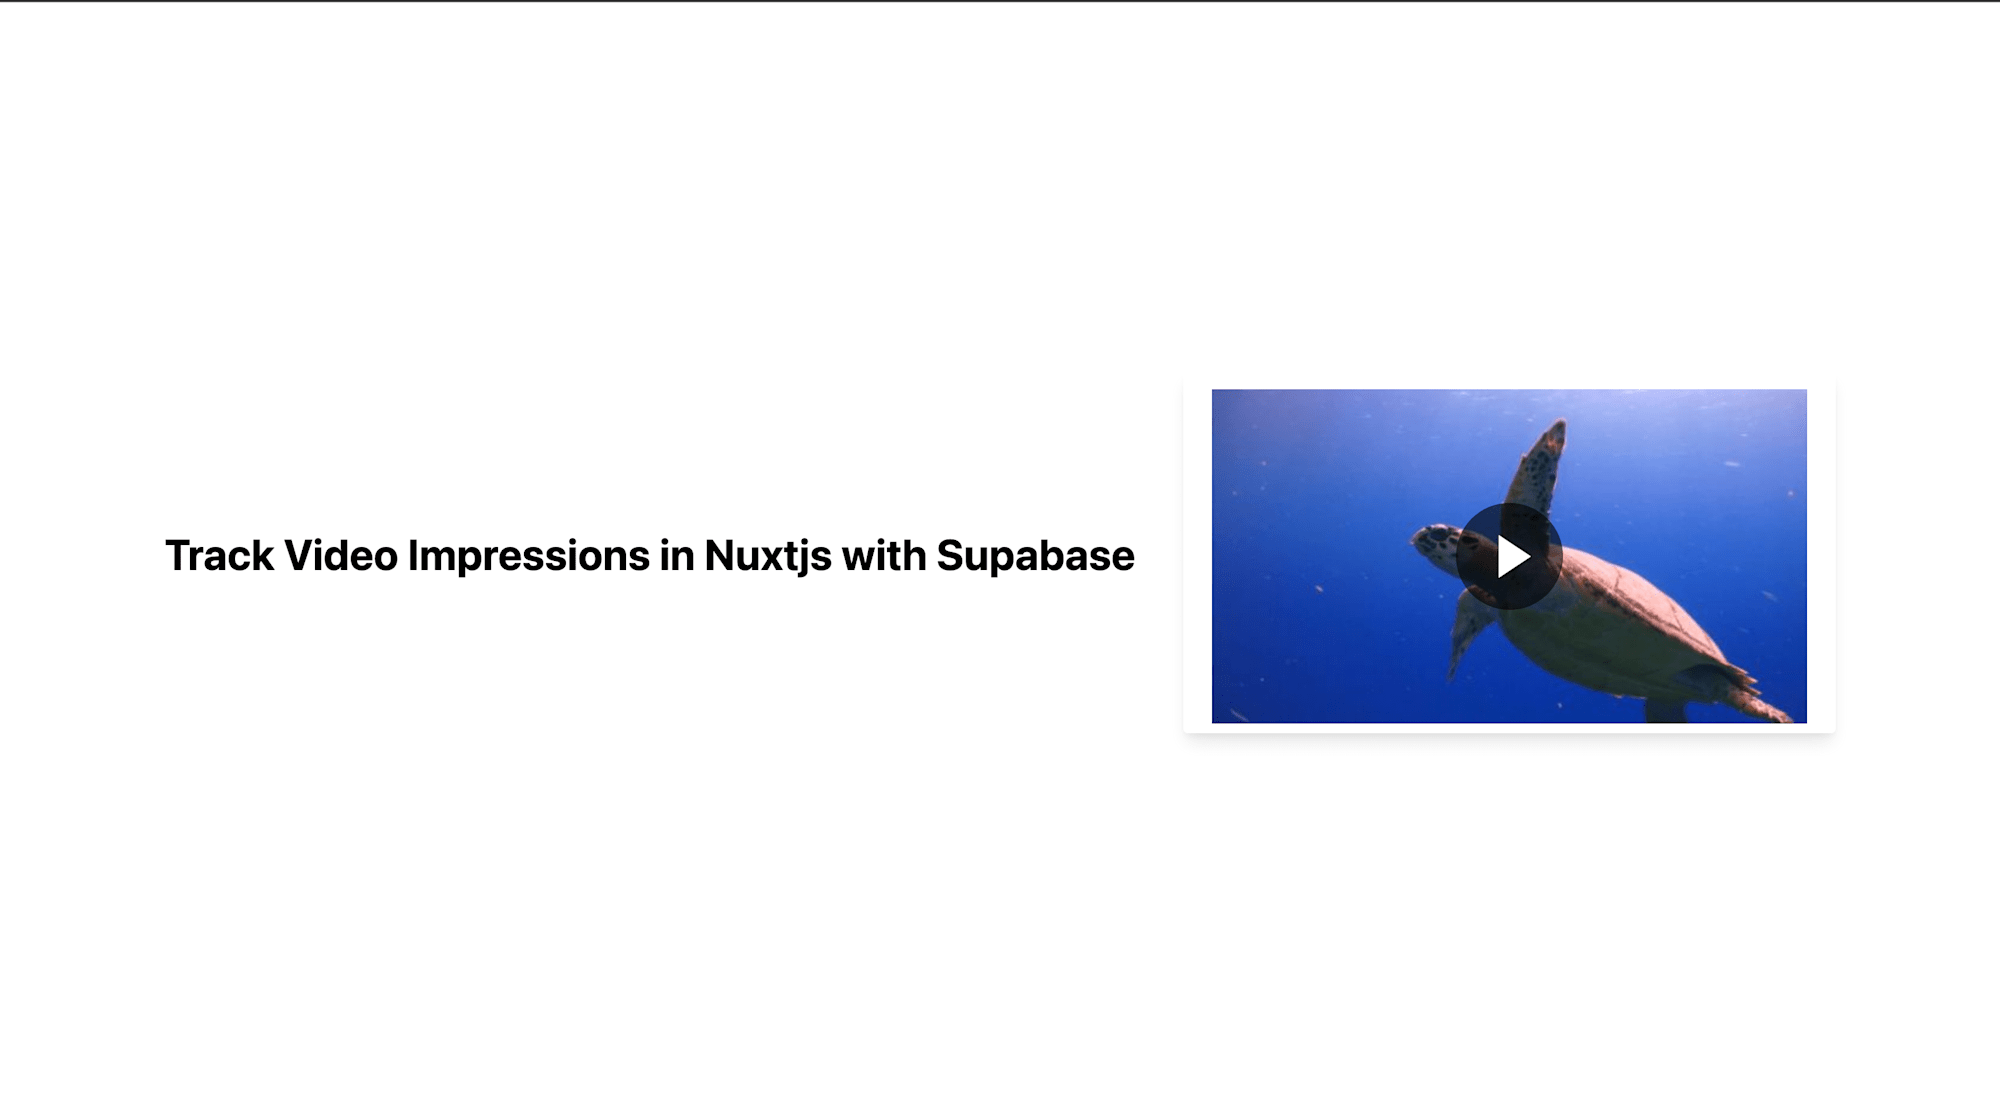 Track Video Impressions in Nuxtjs with Supabase